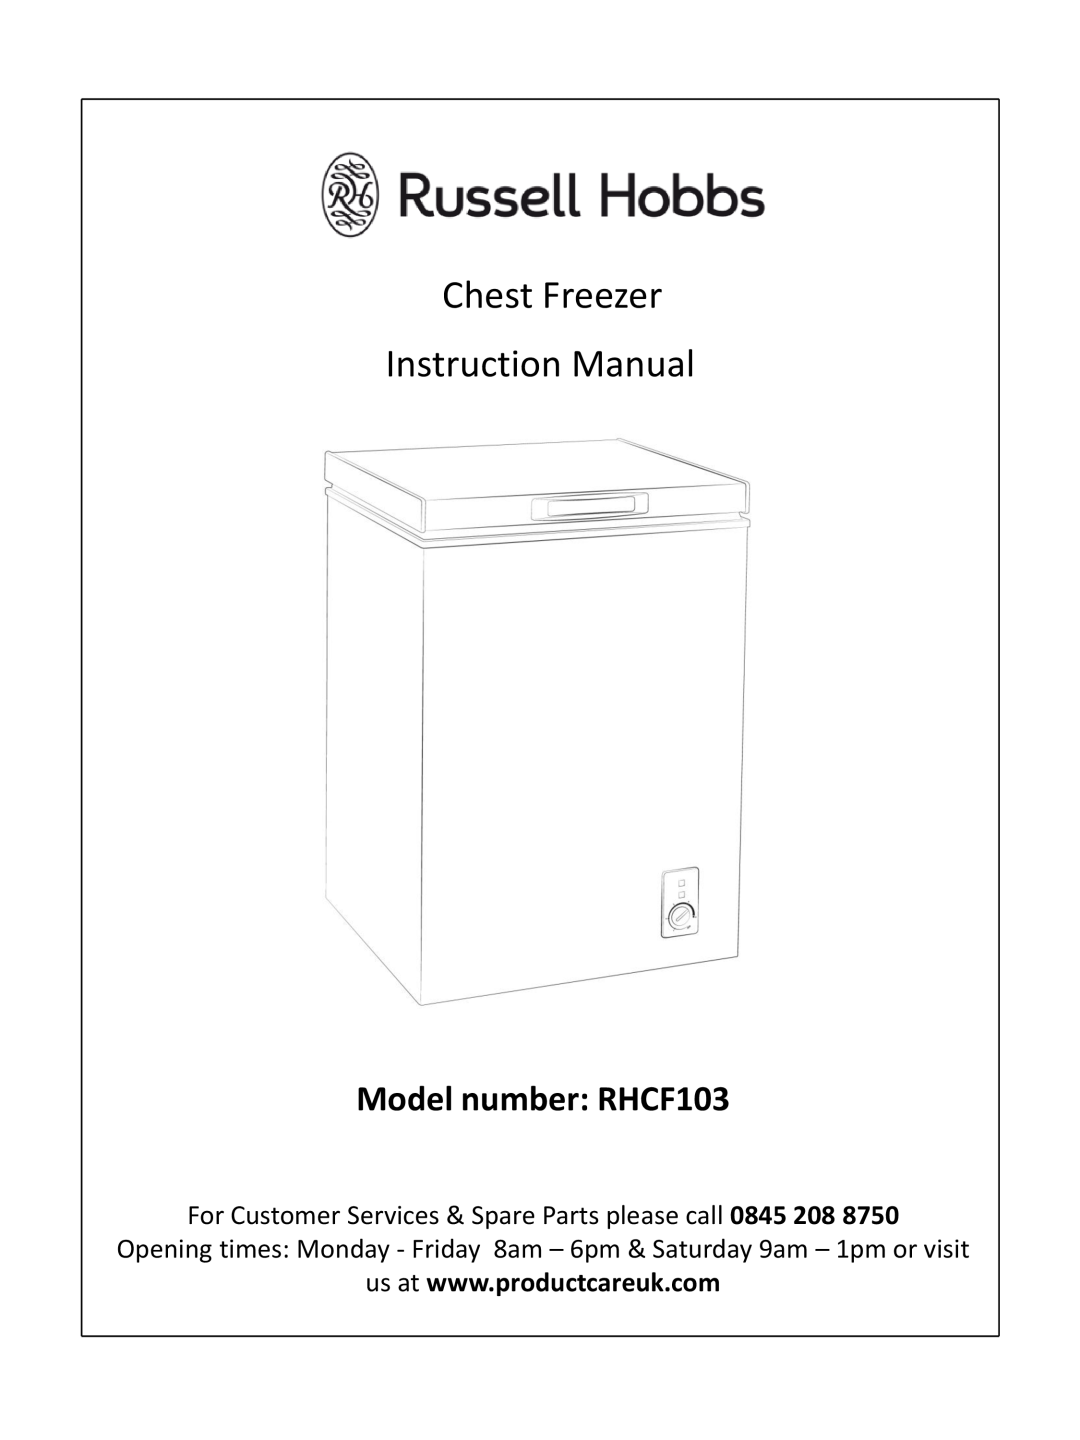 Russell Hobbs instruction manual Model number RHCF103 